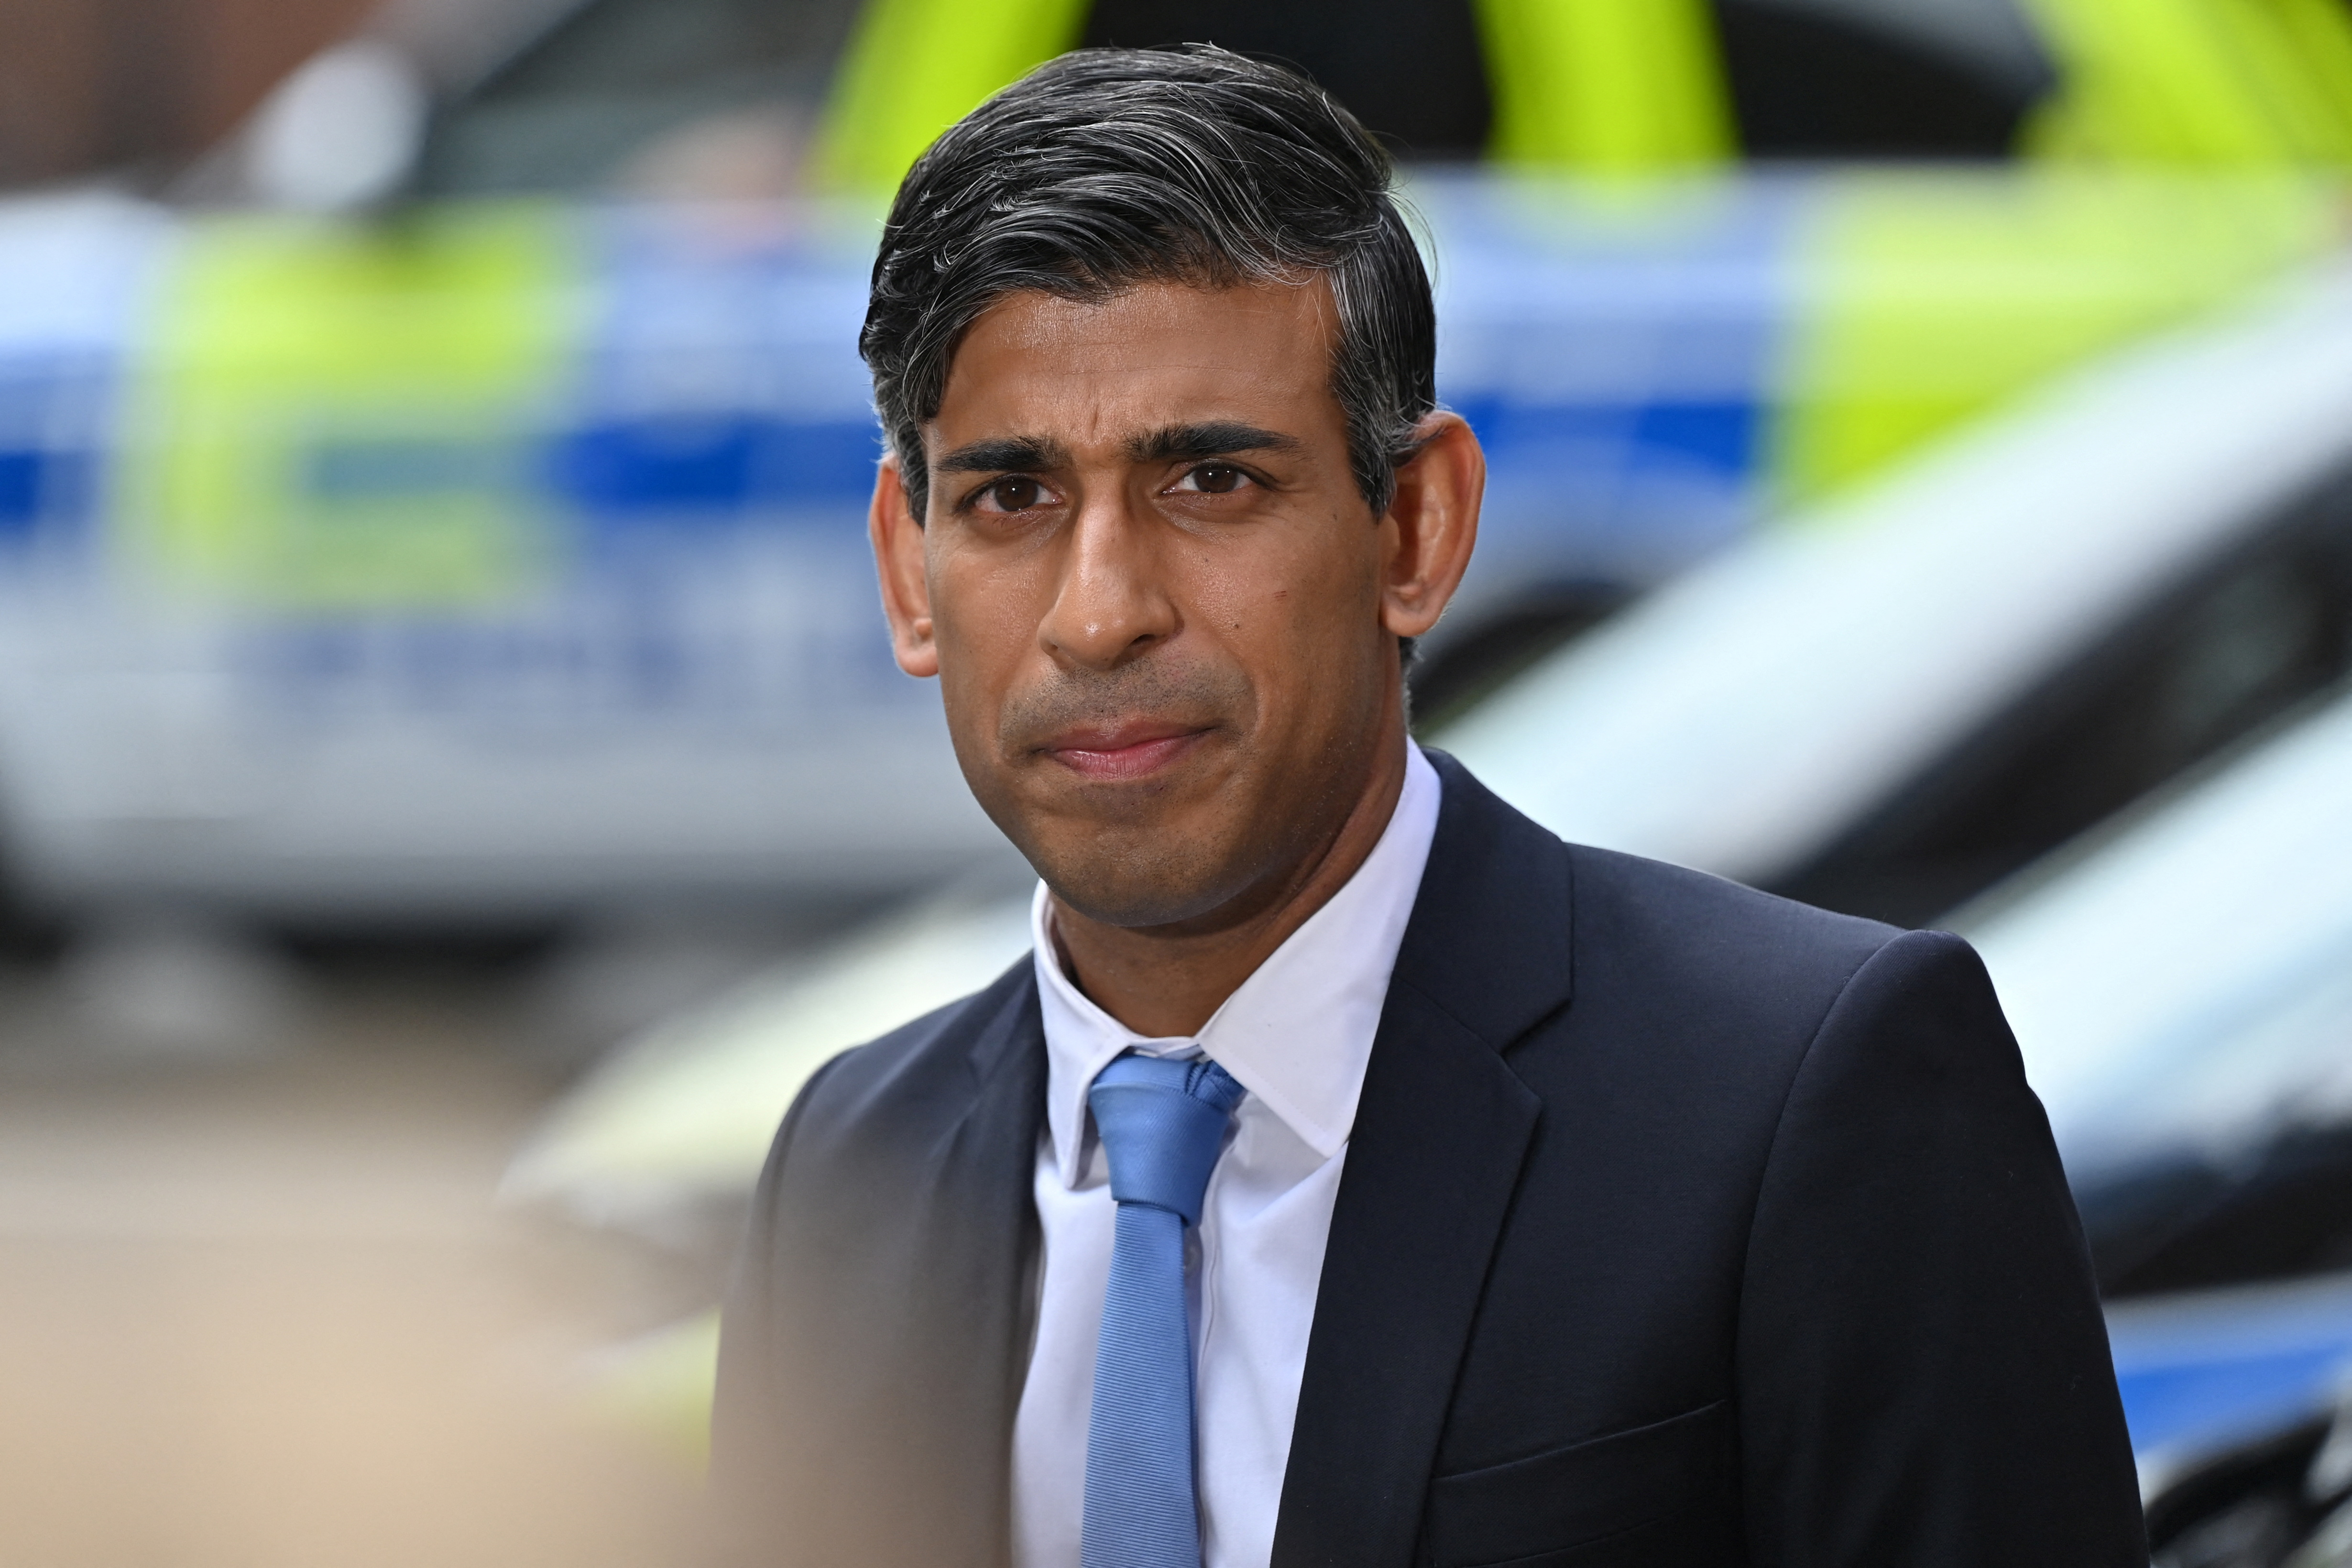 In 2021, when UK Prime Minister RIshi Sunak was Chancellor, the government halved the budget for school repairs in England. But Sunak says it's 'utterly wrong' to blame him for the fiasco./Reuters/Justin Tallis.